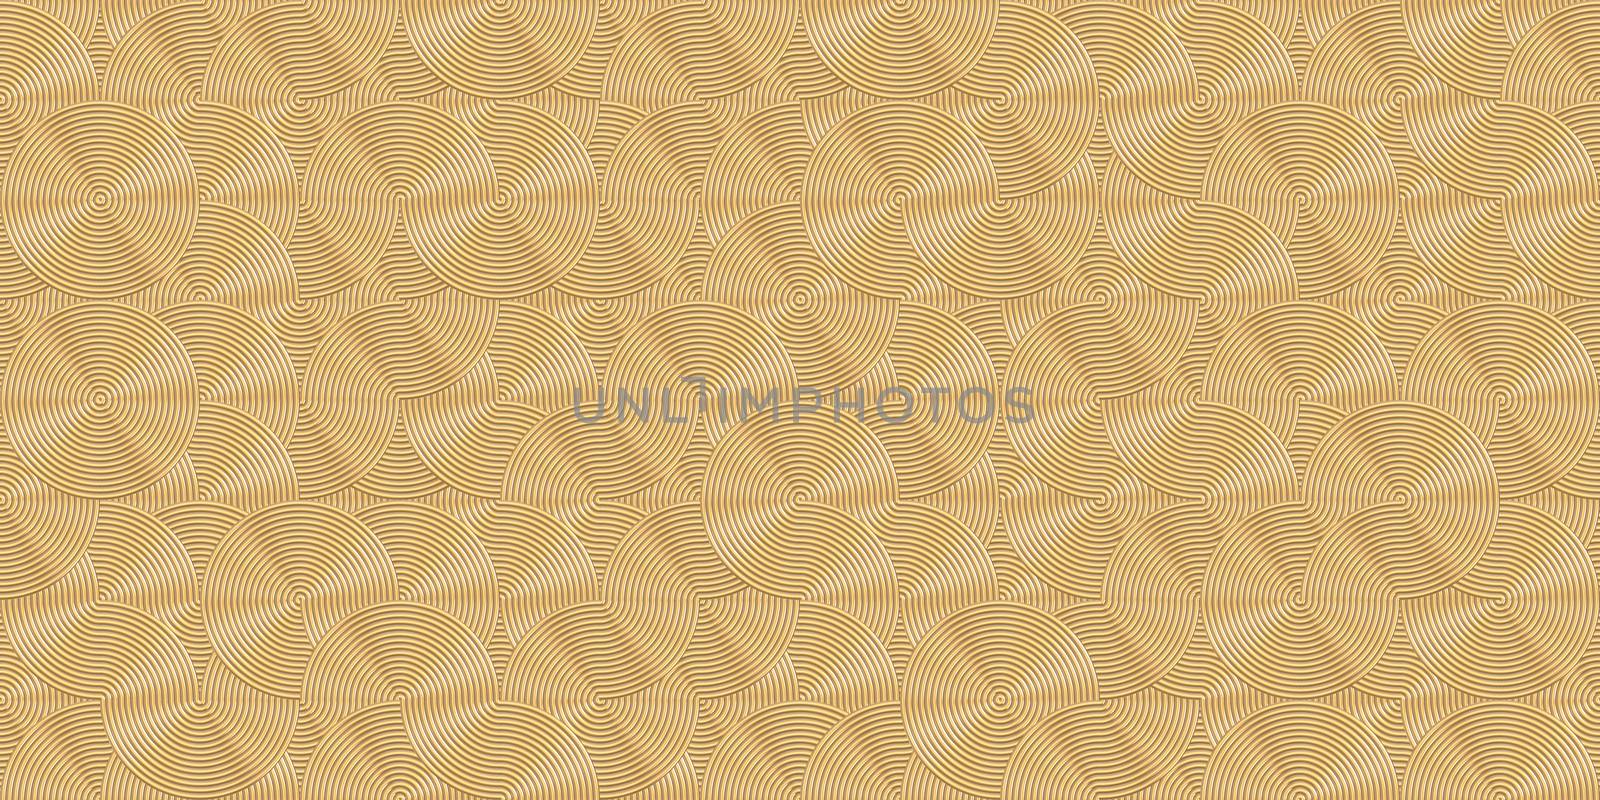 Vintage rings background. Metal circles pattern. Gold art deco seamless texture.